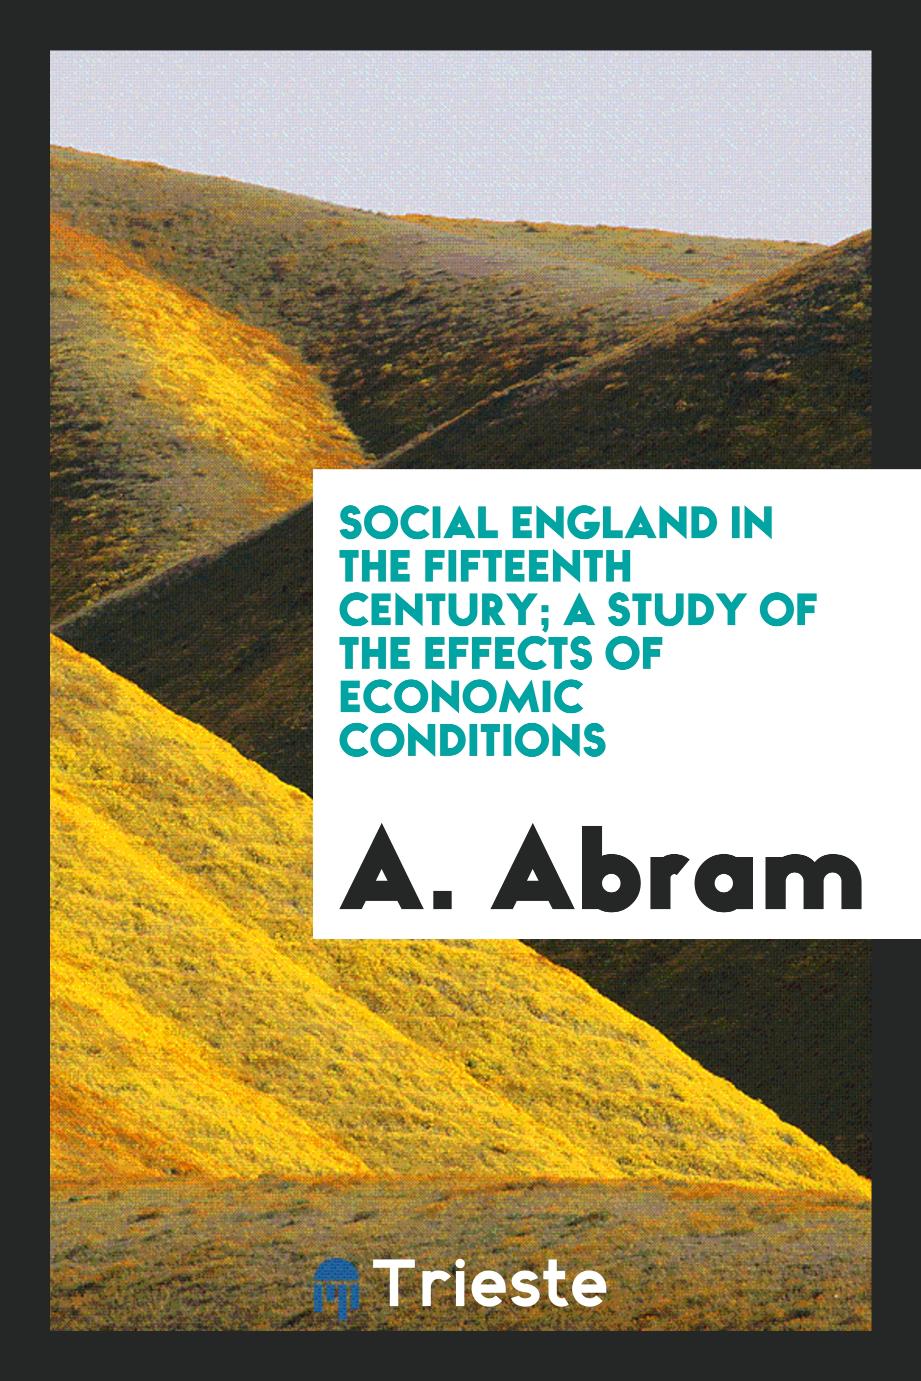 Social England in the fifteenth century; a study of the effects of economic conditions